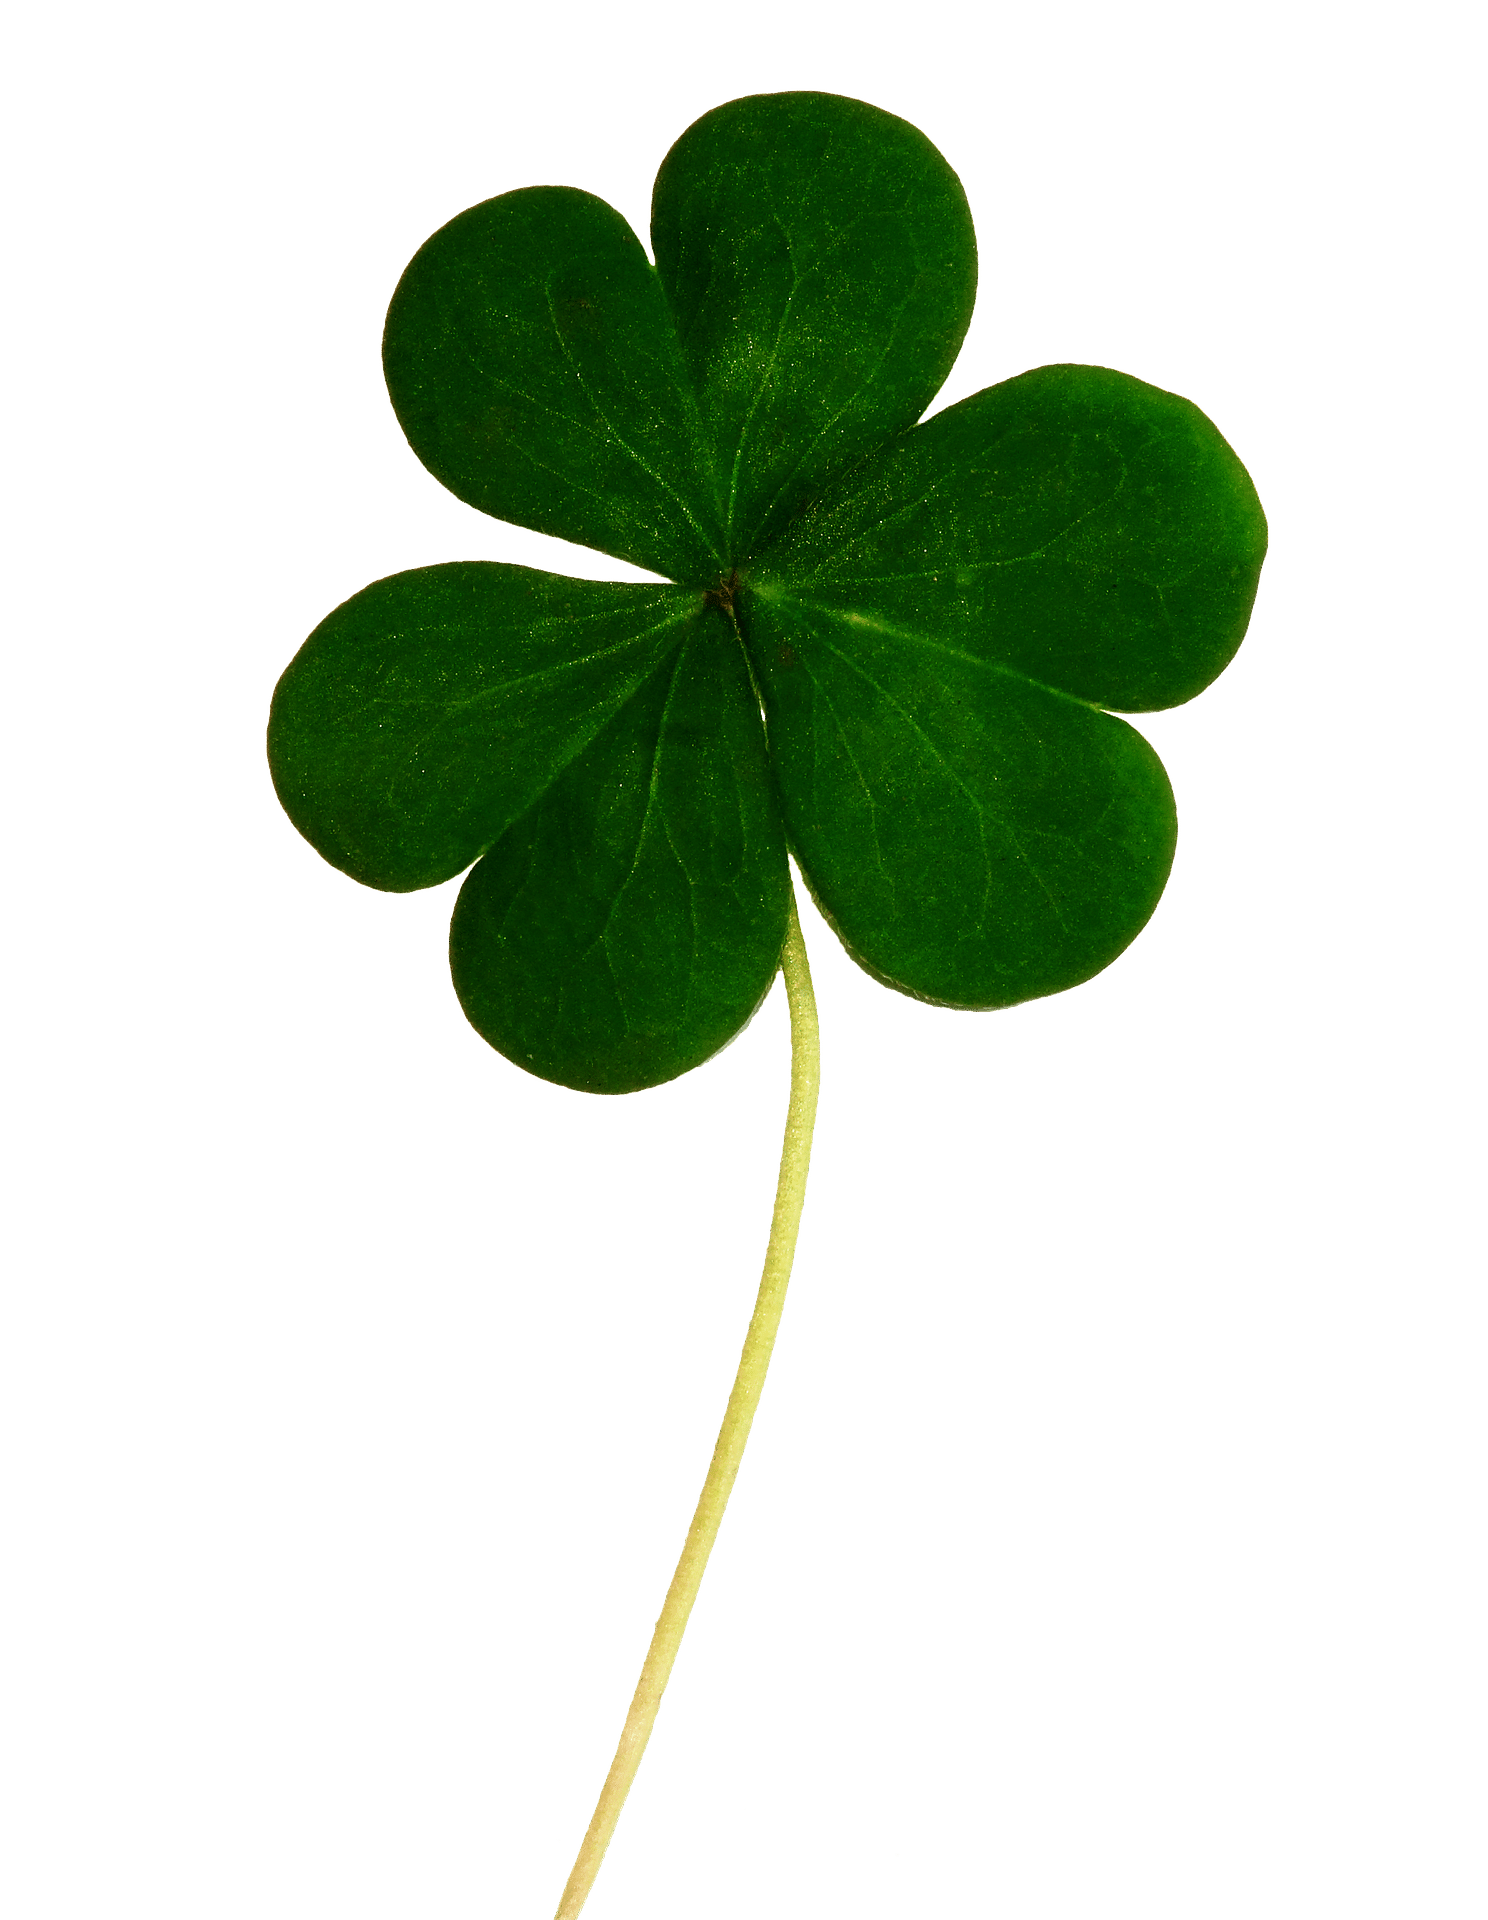 Top 5 Events In Orange County For Saint Patrick’s Day (Most Family Friendly)